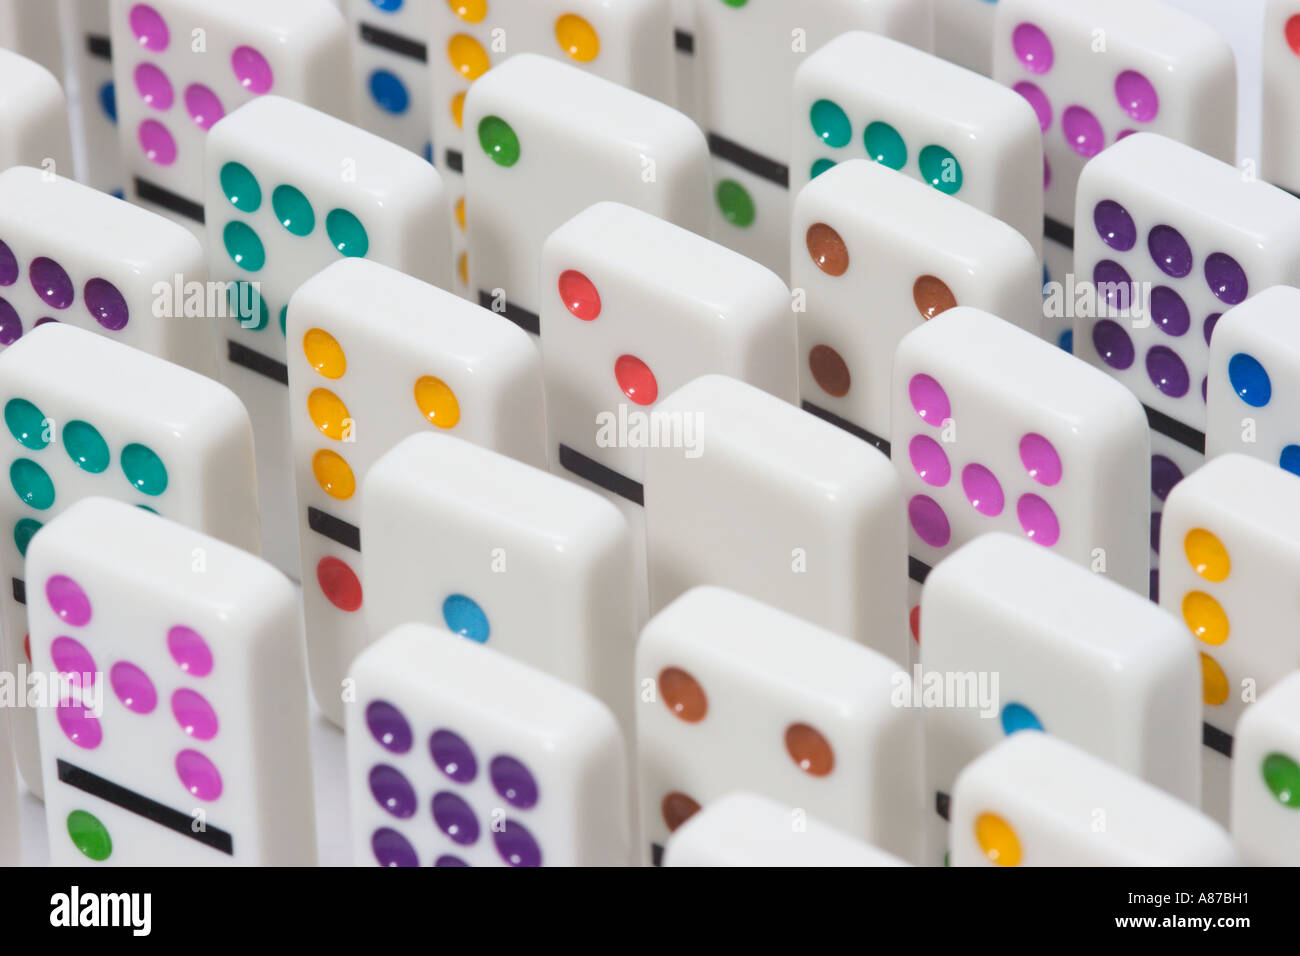 Uniform rows of white dominoes with brightly colored dots standing on end Stock Photo